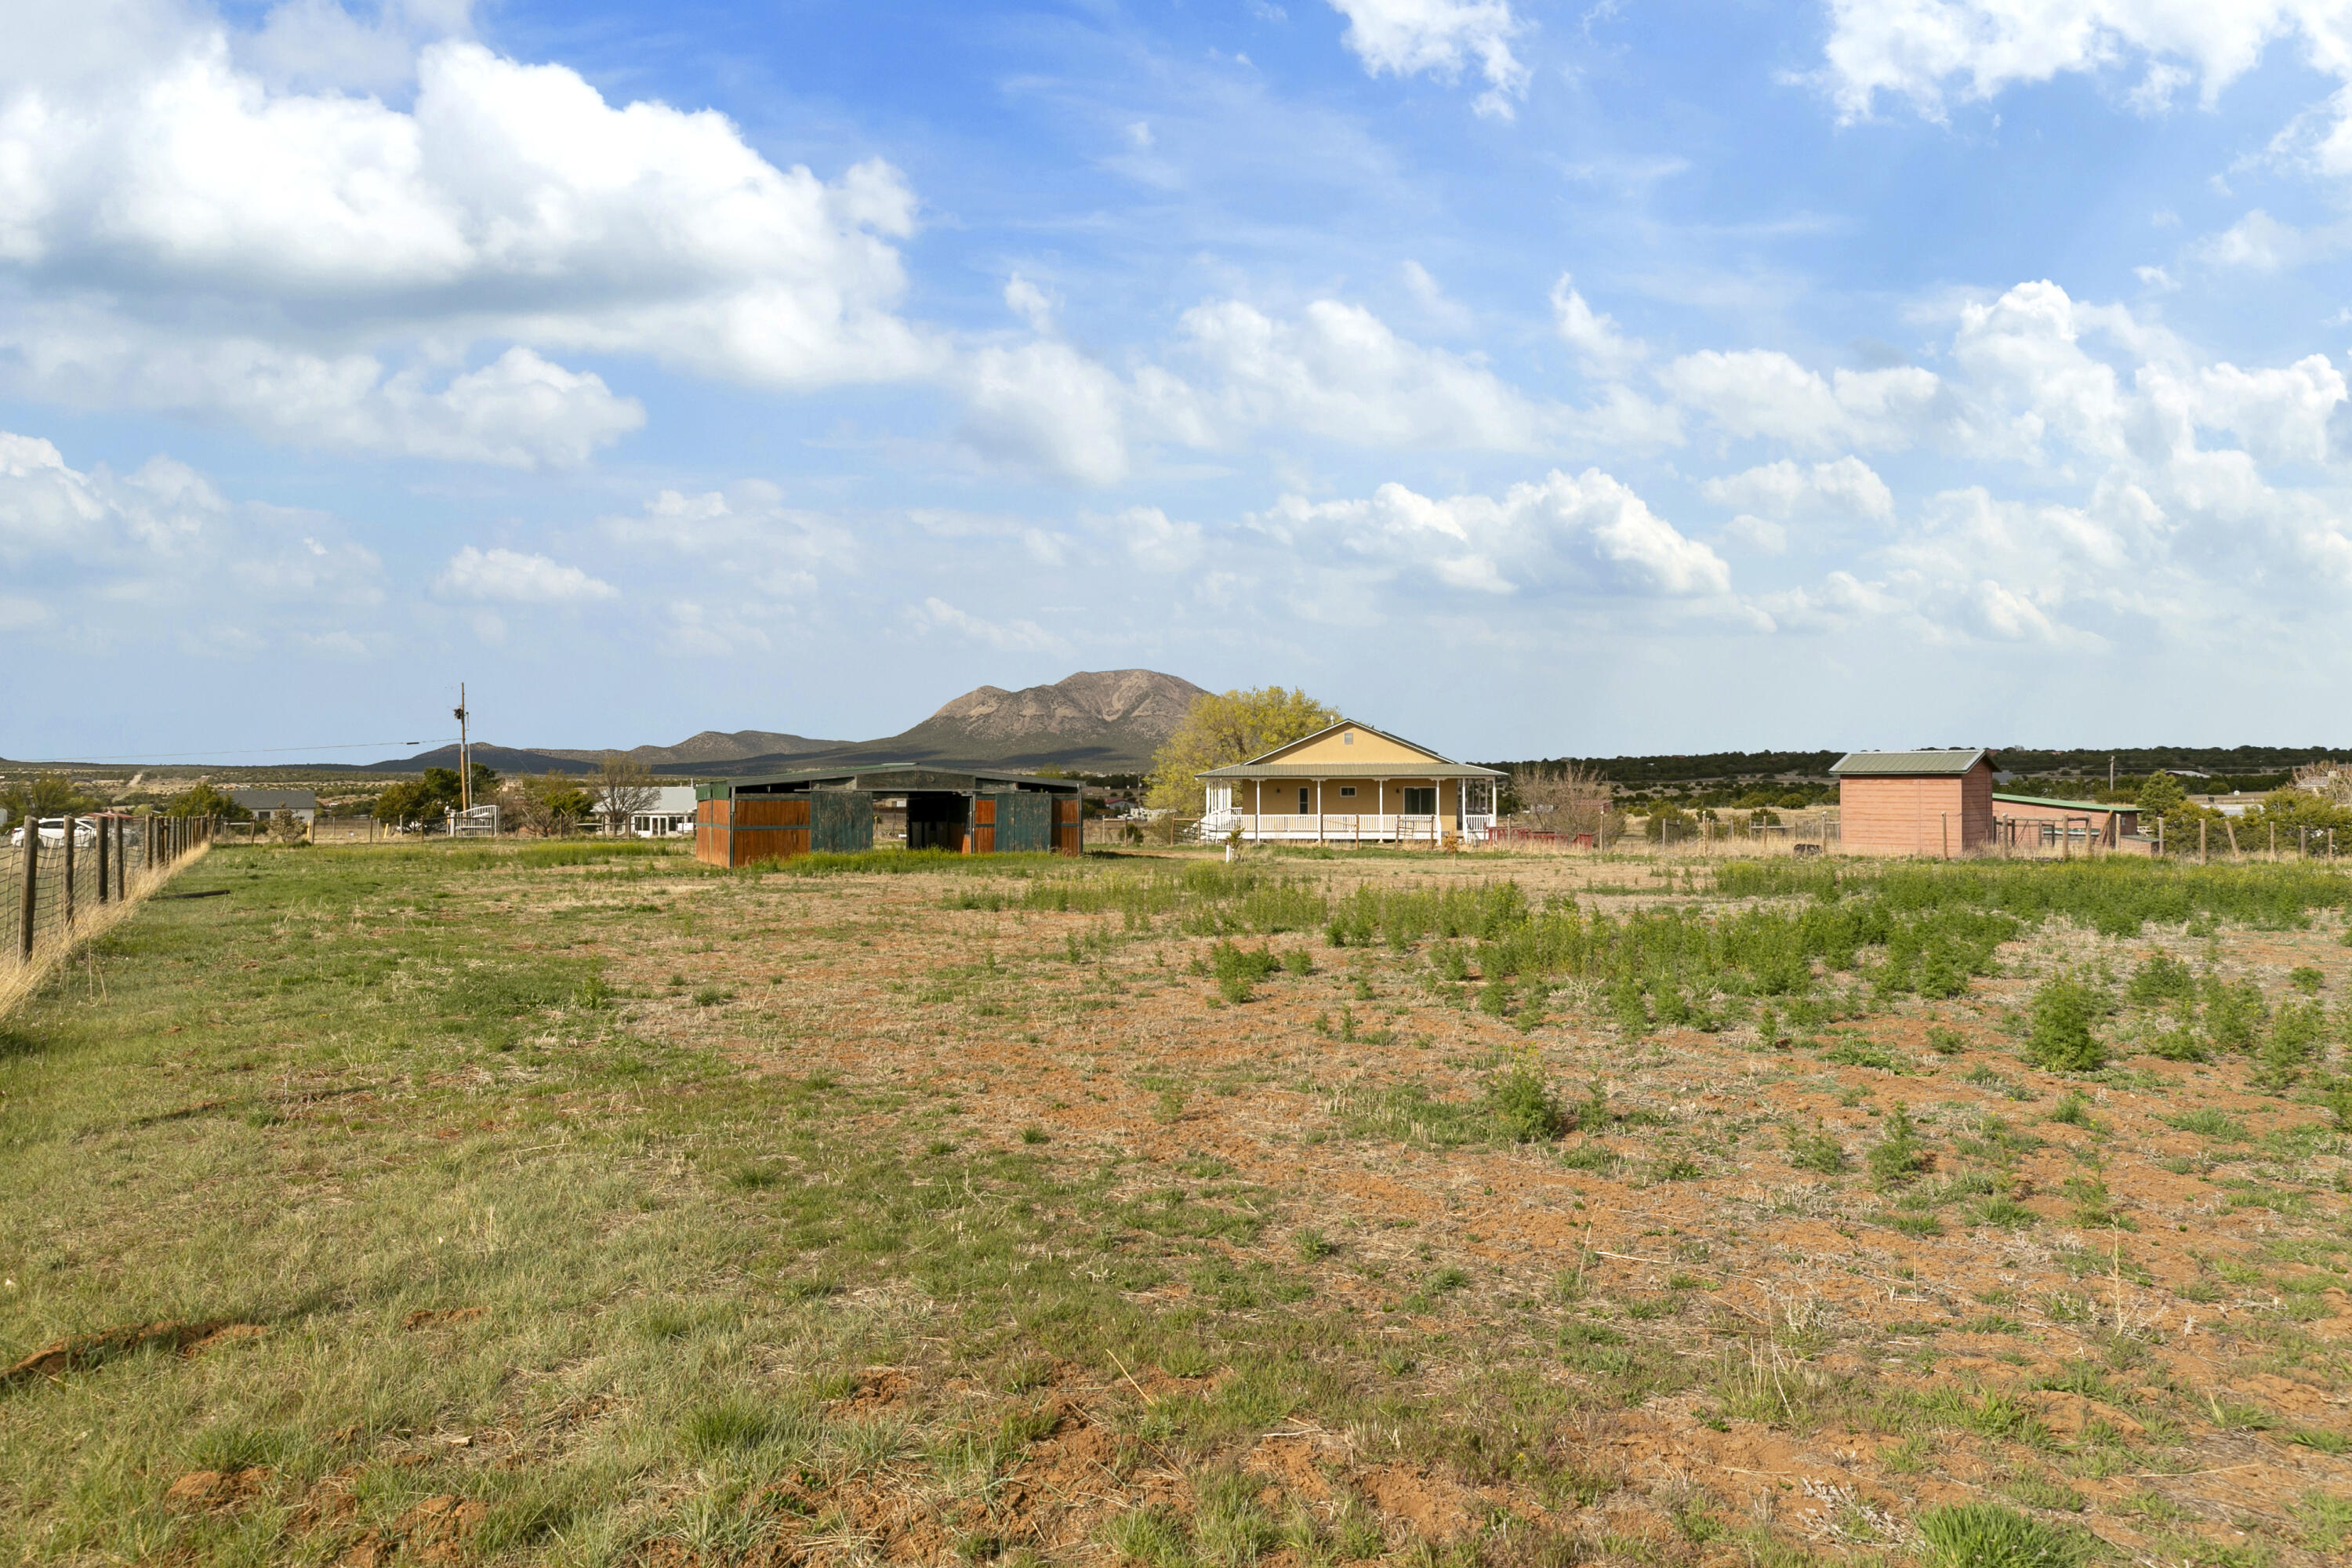 6 Revelation Place, Edgewood, New Mexico 87015, 5 Bedrooms Bedrooms, ,4 BathroomsBathrooms,Residential,For Sale,6 Revelation Place,1062224